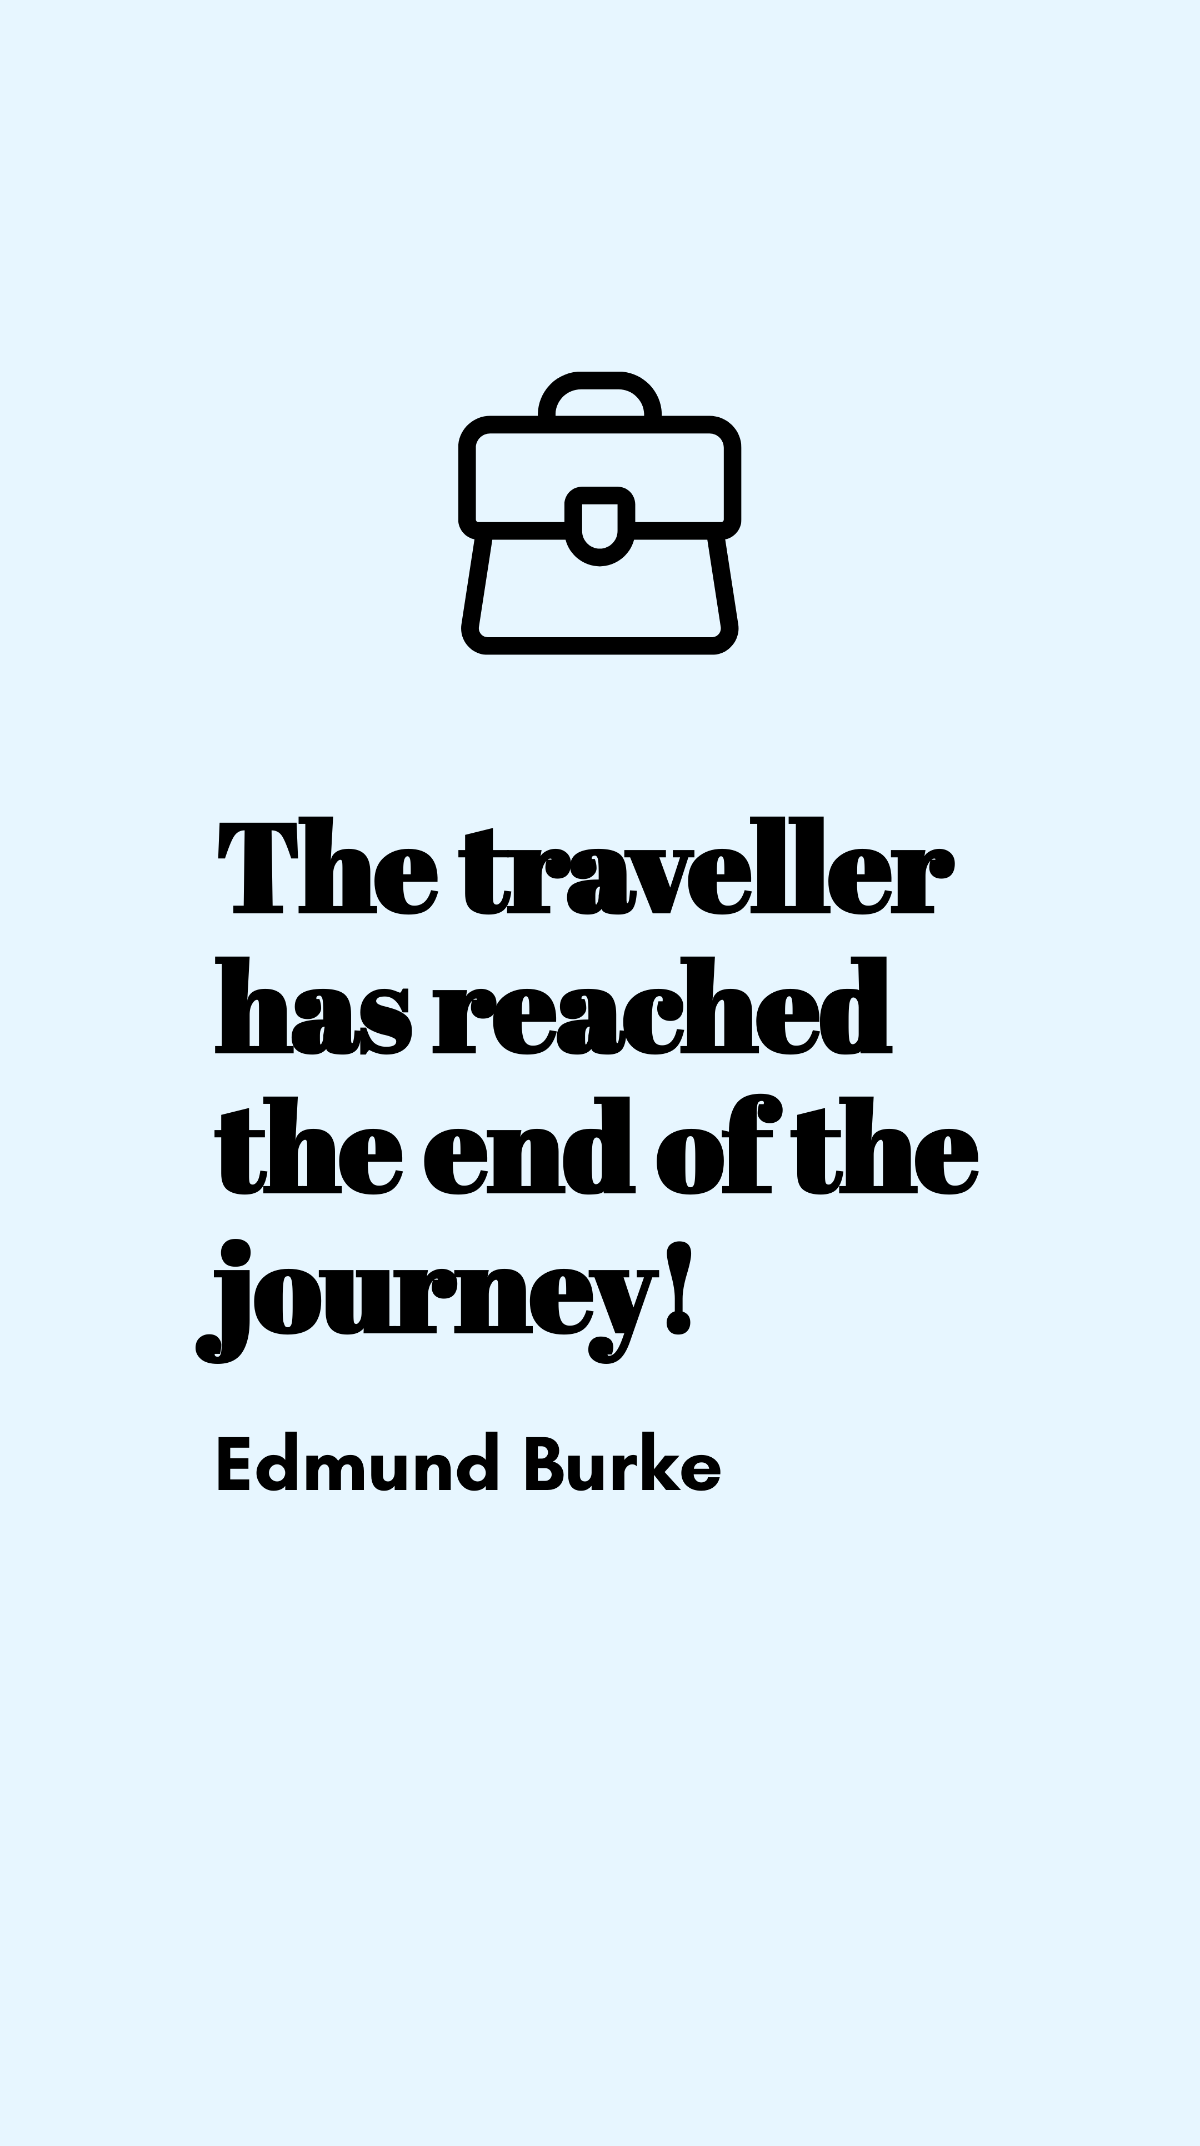 Edmund Burke - The traveller has reached the end of the journey! Template